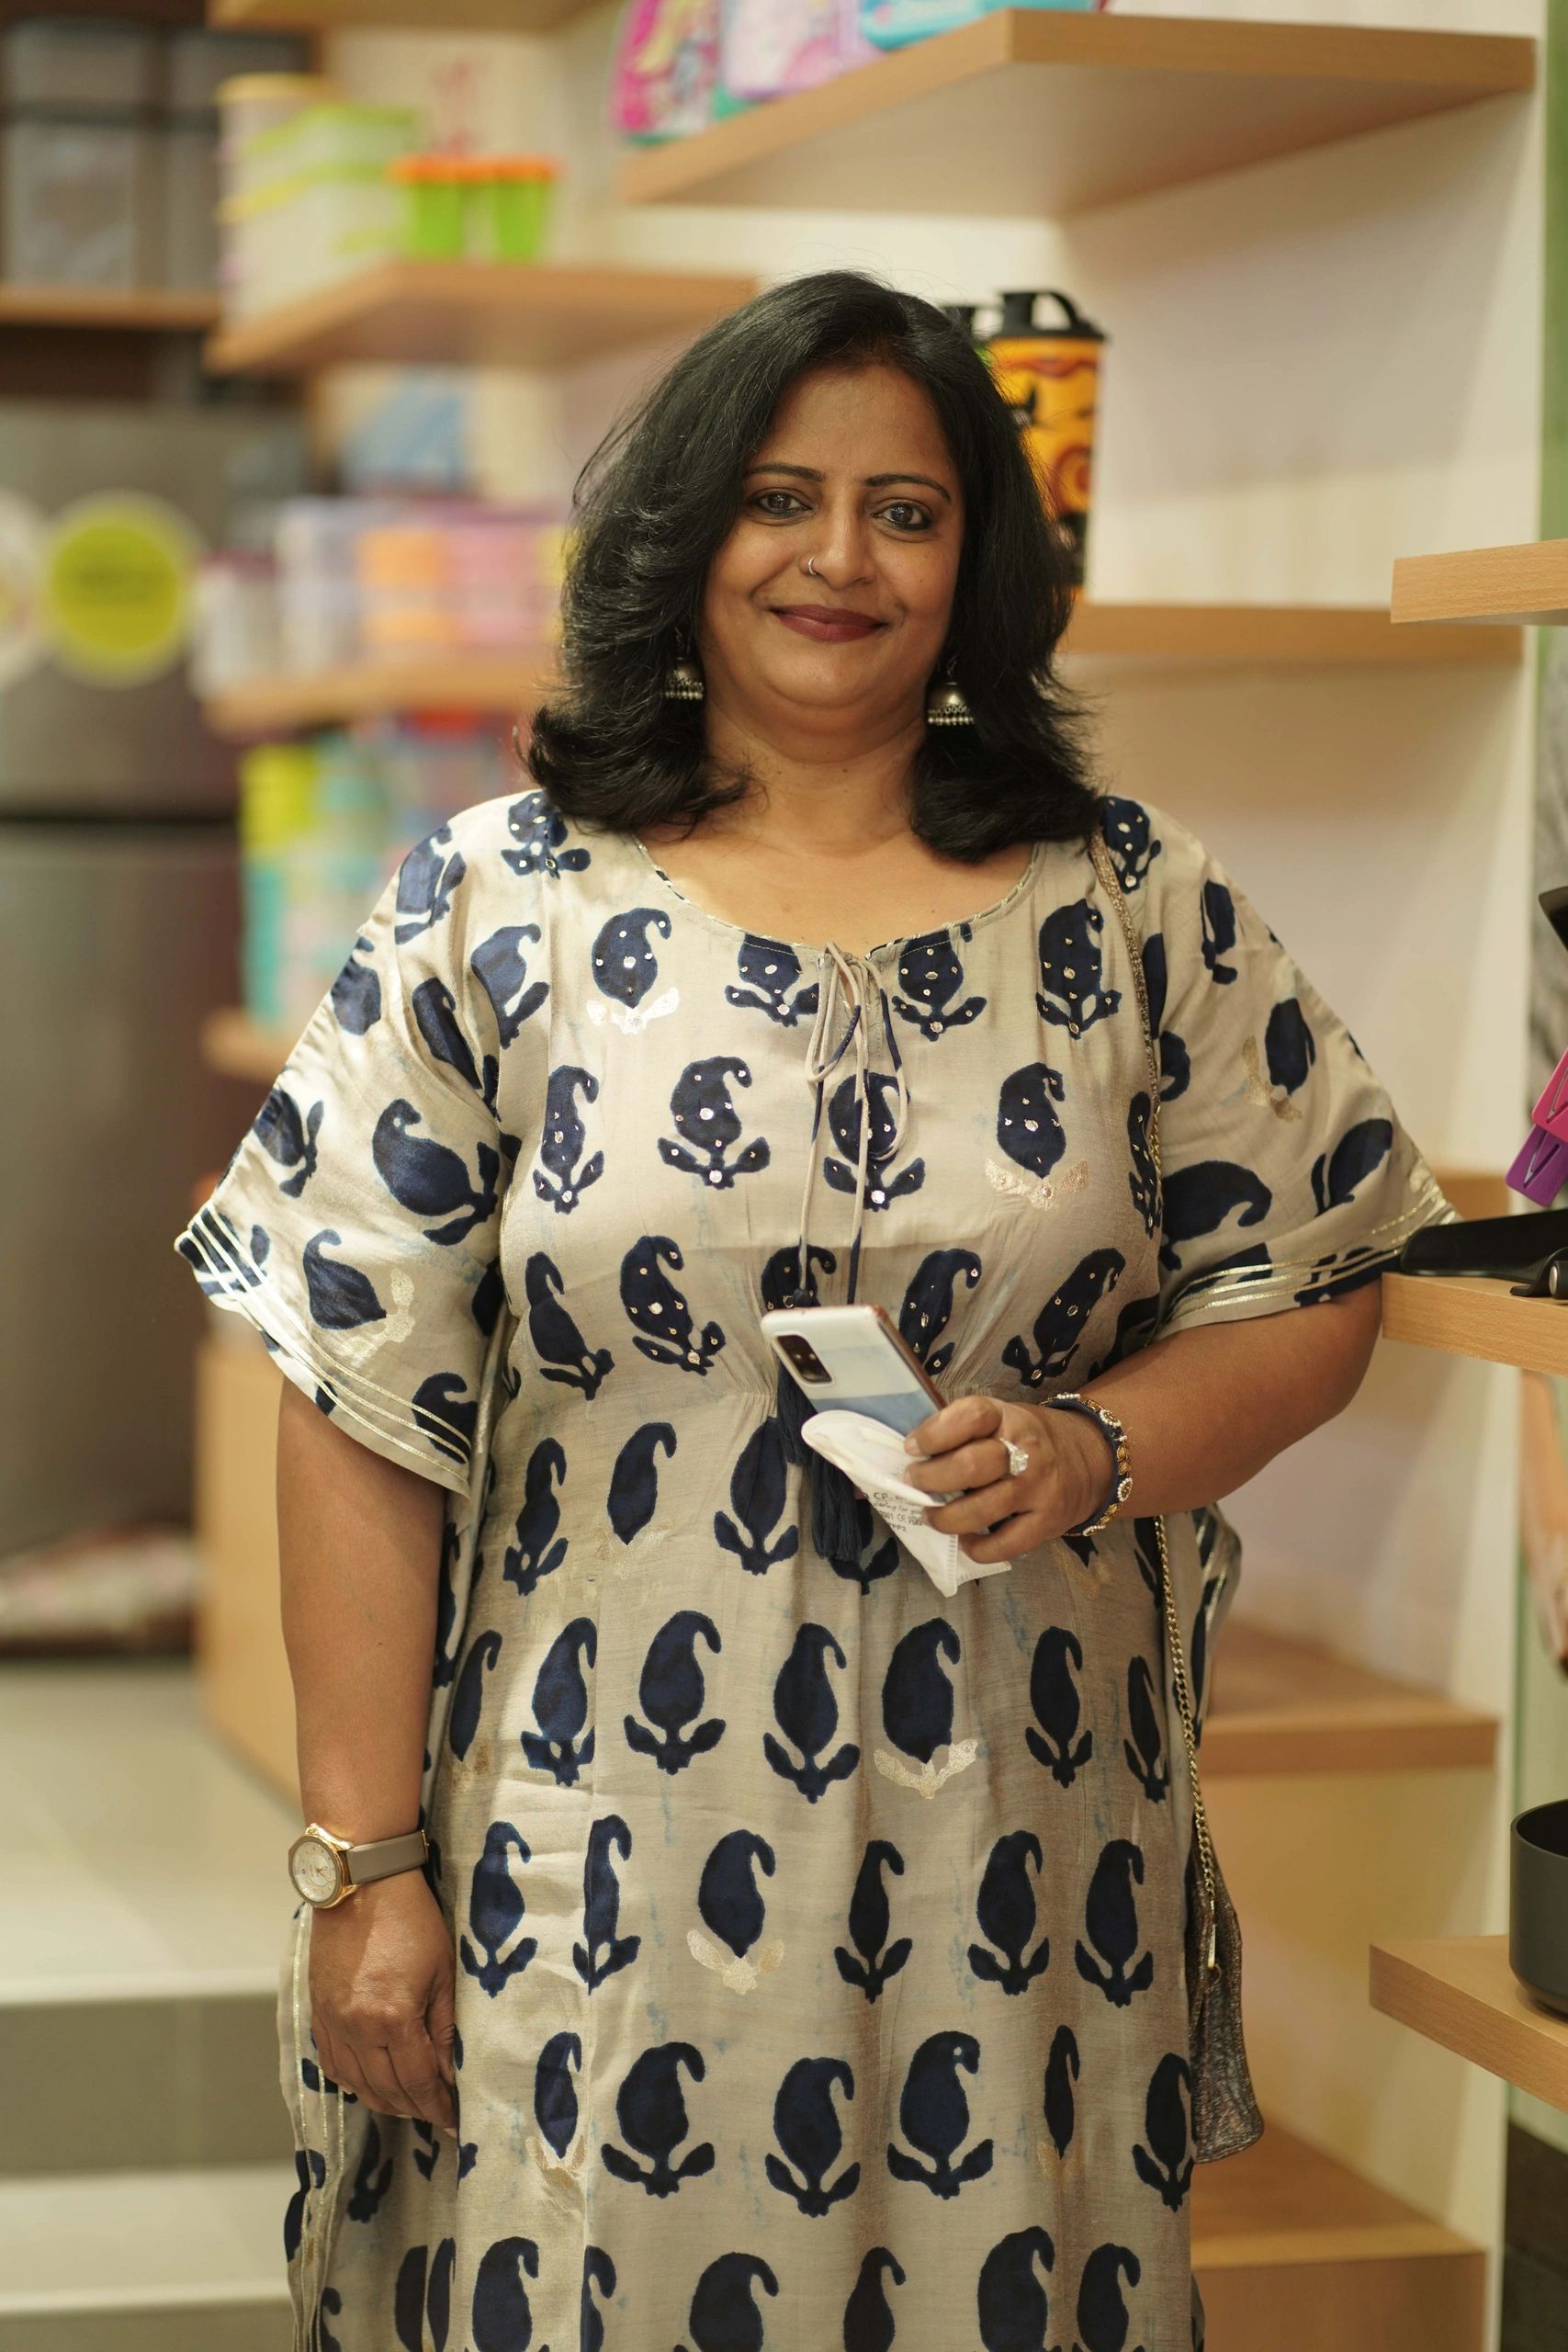 Tupperware India Launches Four New Stores; Plans 180 Stores By End Of 2021  - The NFA Post